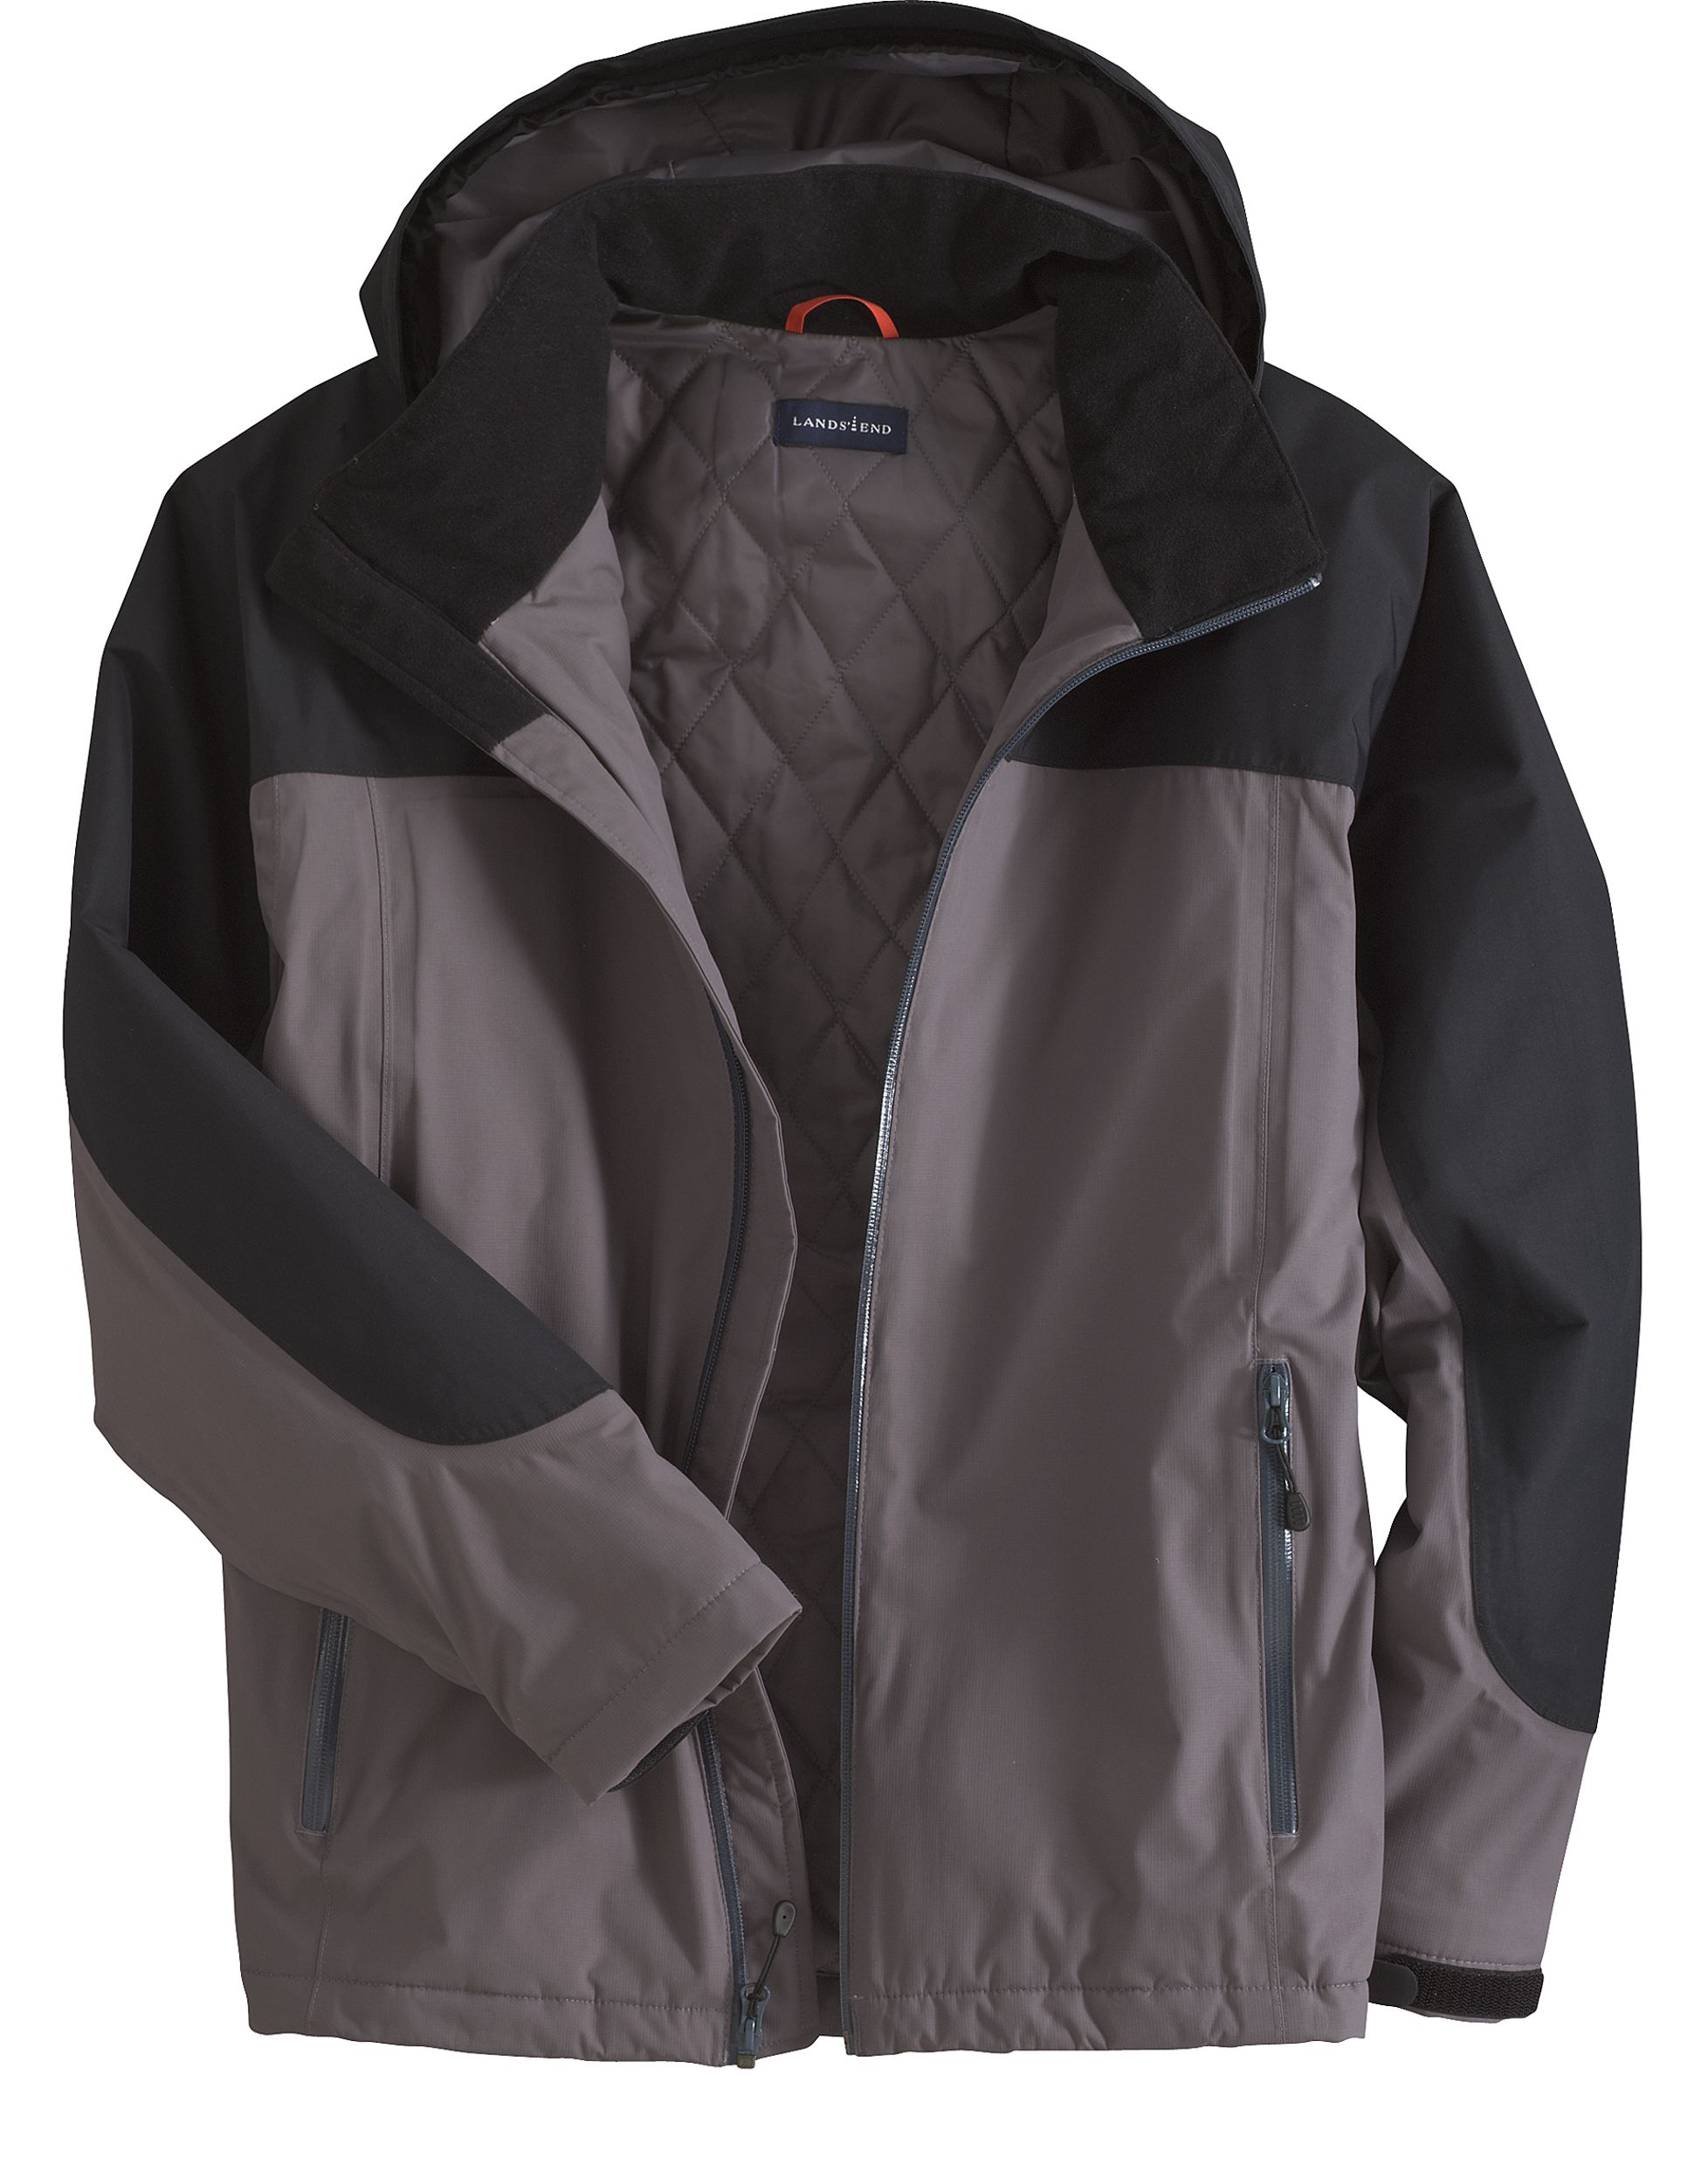 Lands' End Mens Tall Extreme Squall Jacket